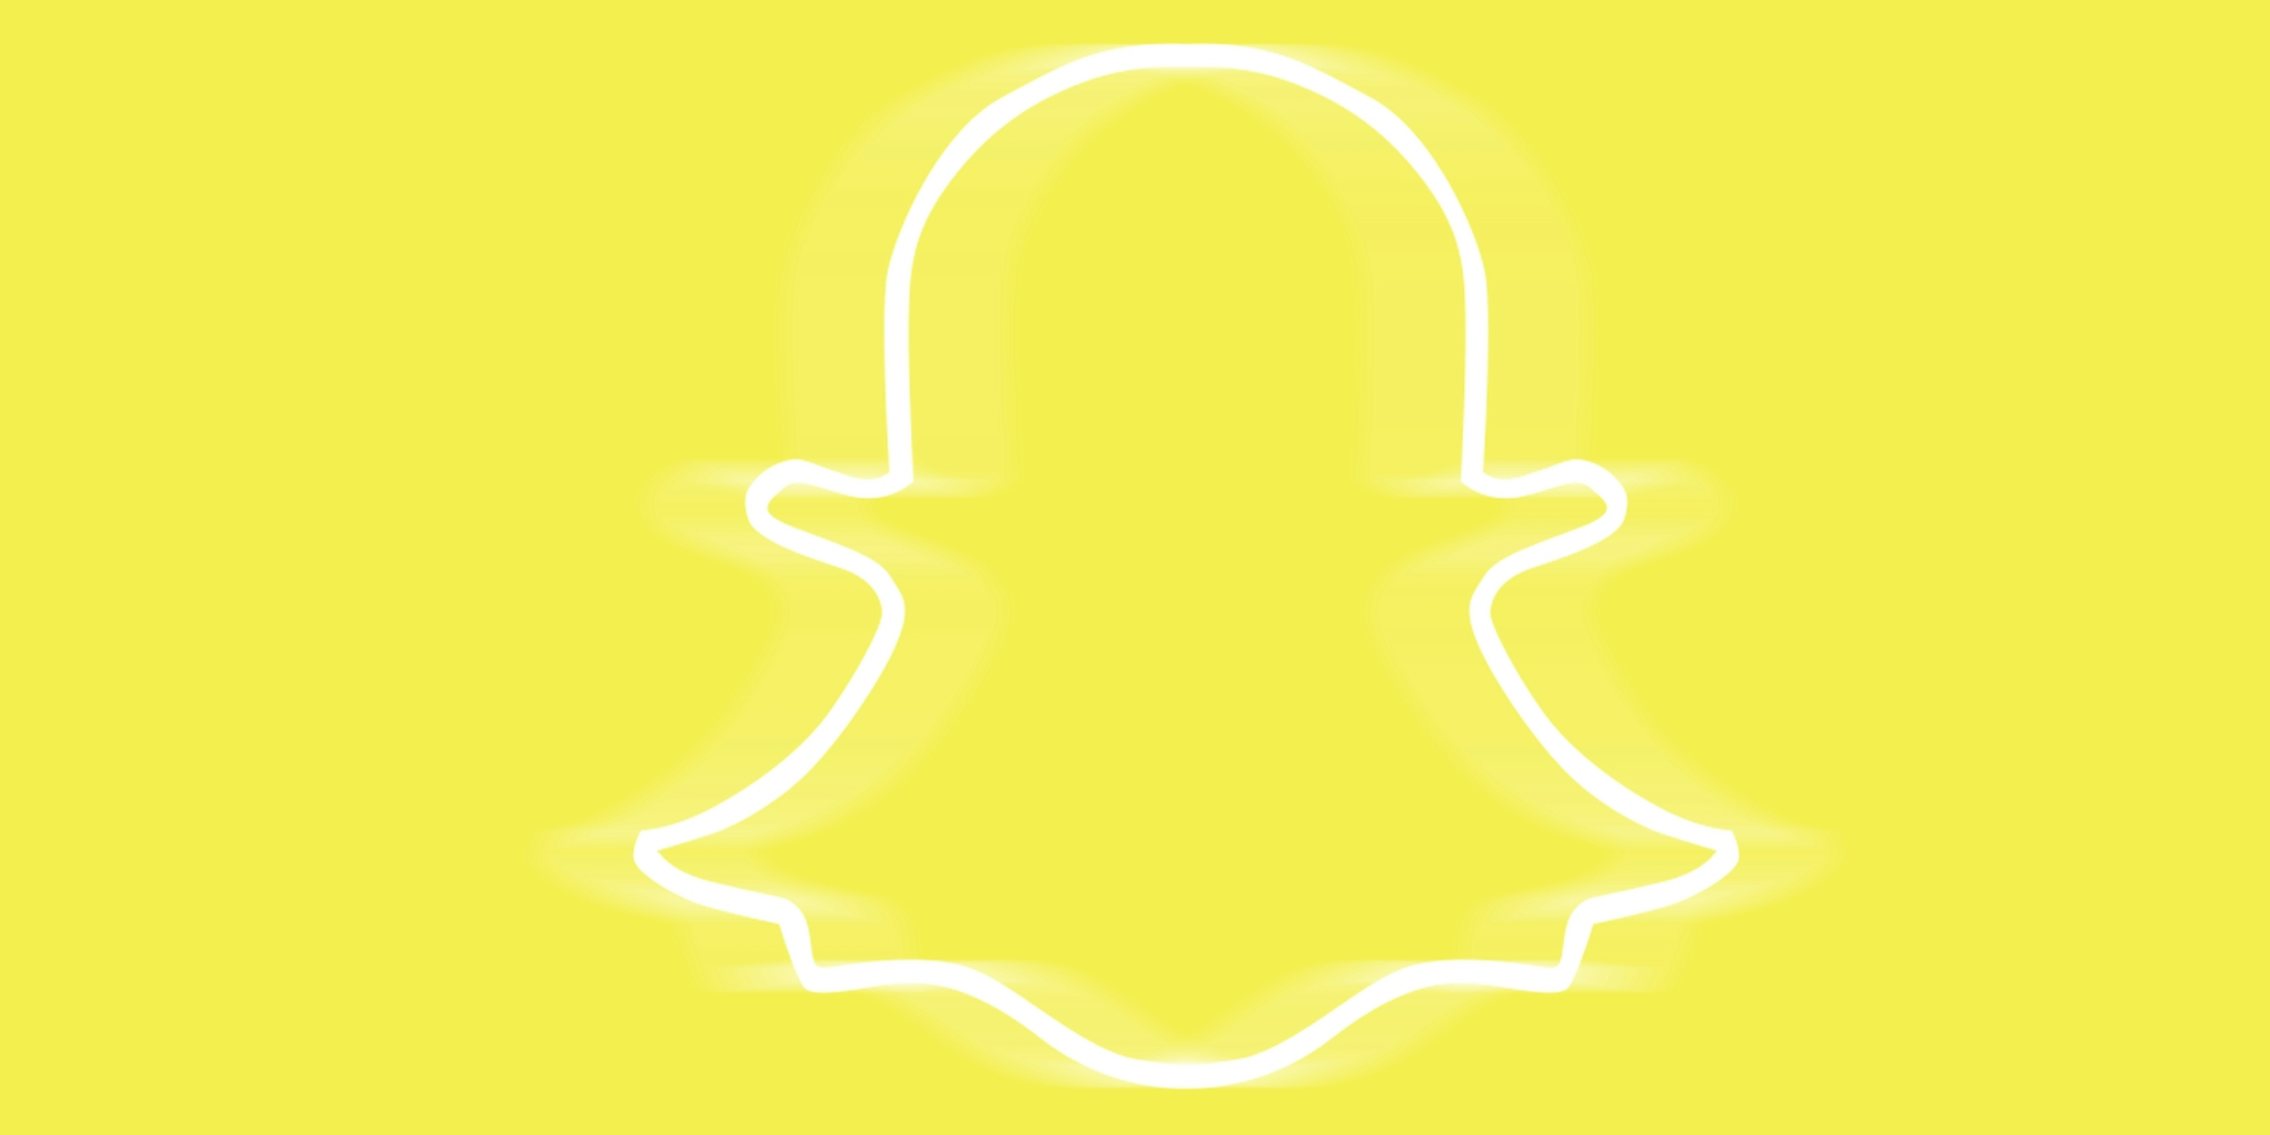 how to follow someone on snapchat